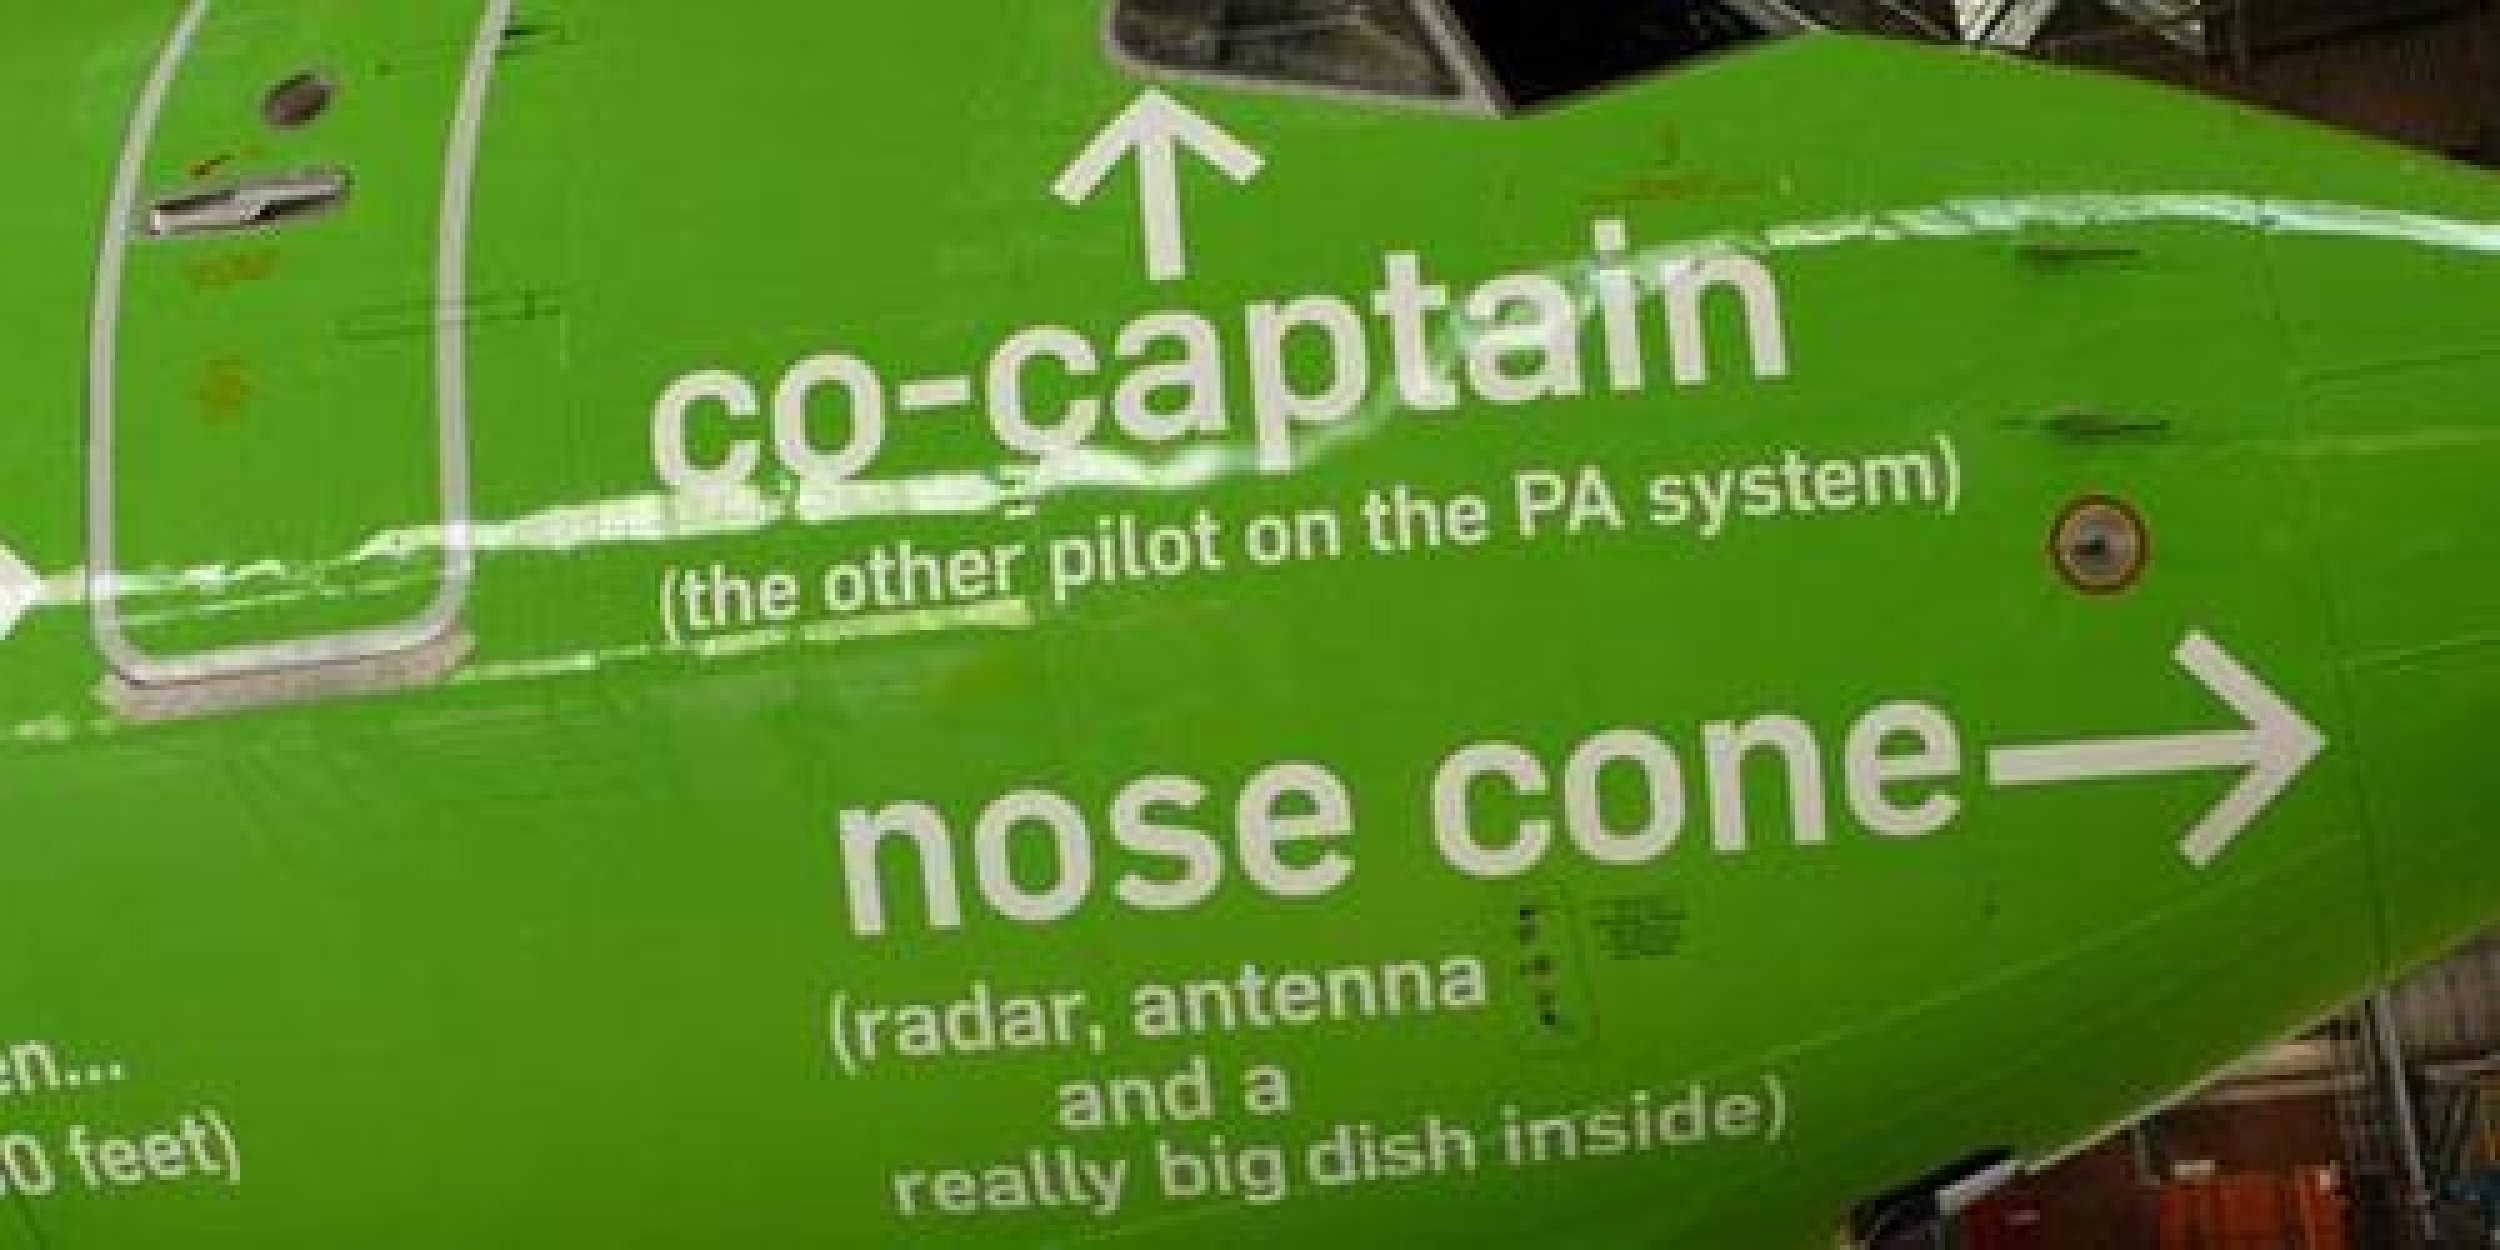 In case you didnt know the different parts of an airplane, Kulula Airlines has marked its own jet to tell you what everything is. Here, you can see where the co-captain sits, and what fits inside the nose cone of the plane.